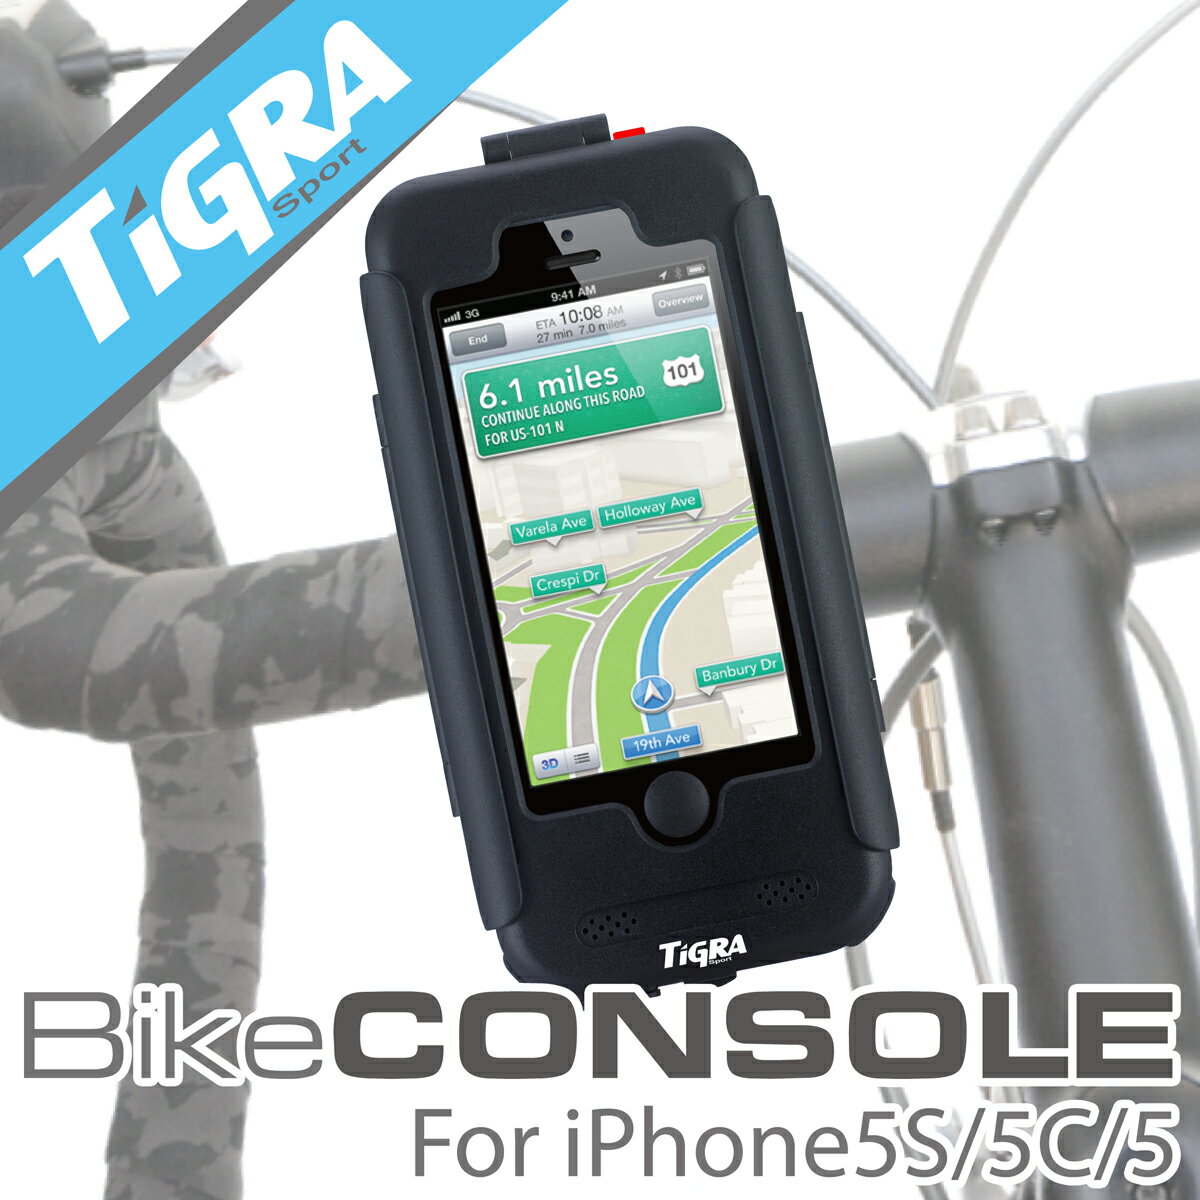 TiGRA Sport BikeCONSOLE iPhone5 iPhone5S iPhone5C ] oCN z_[ hho ] }EgP[X ir iPhone ACtH hCuR[_[ TCNRs[^[ X|[cEAEghA ] ANZT[EObY L[obOE[P[X